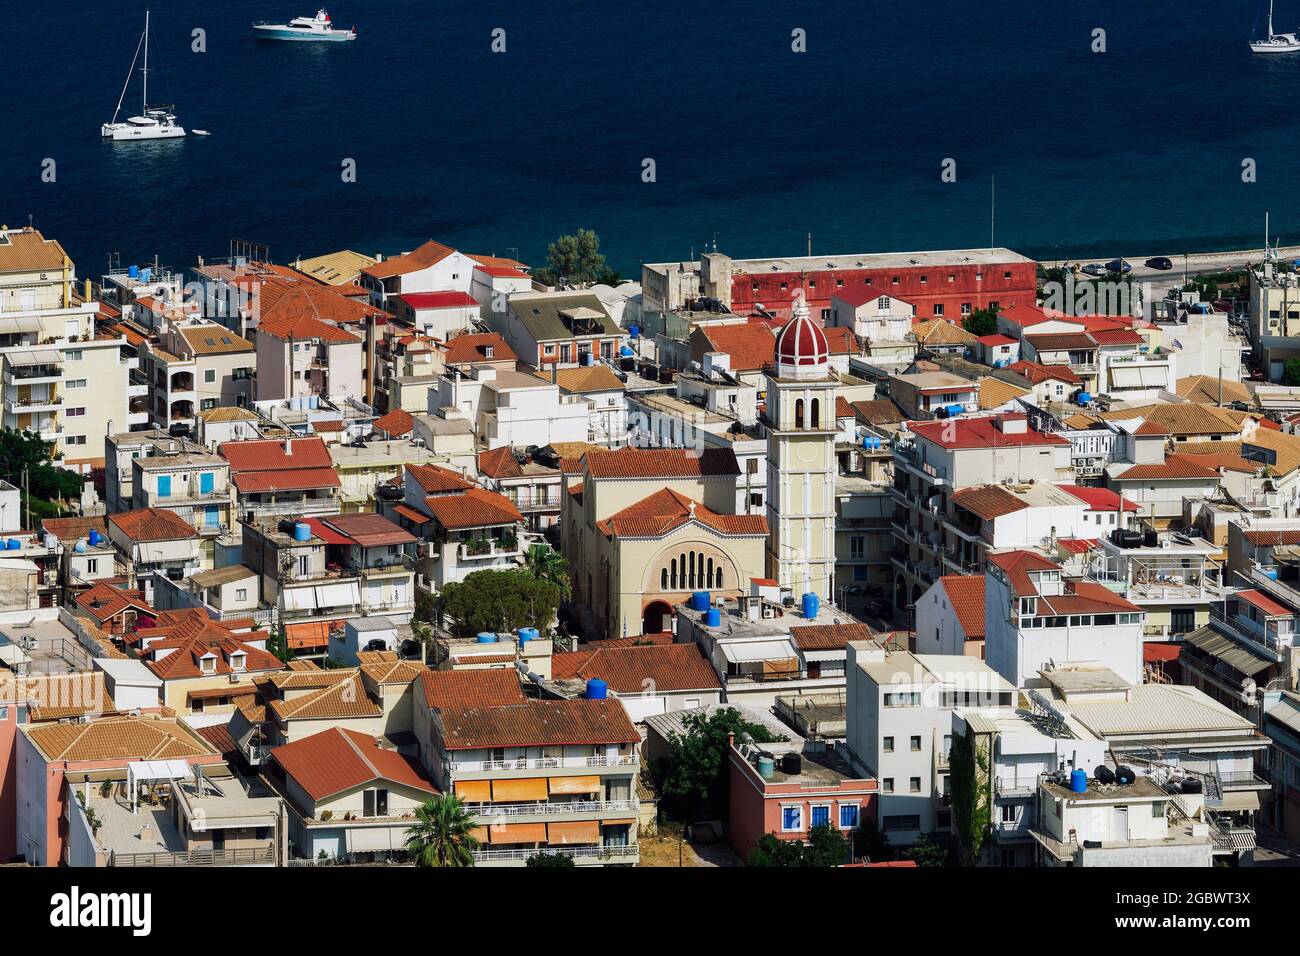 Zakynthos, Greece Island capital panorama with low rise buildings. Sunny view of Orthodox church around red tile houses, next to calm see waterfront. Stock Photo